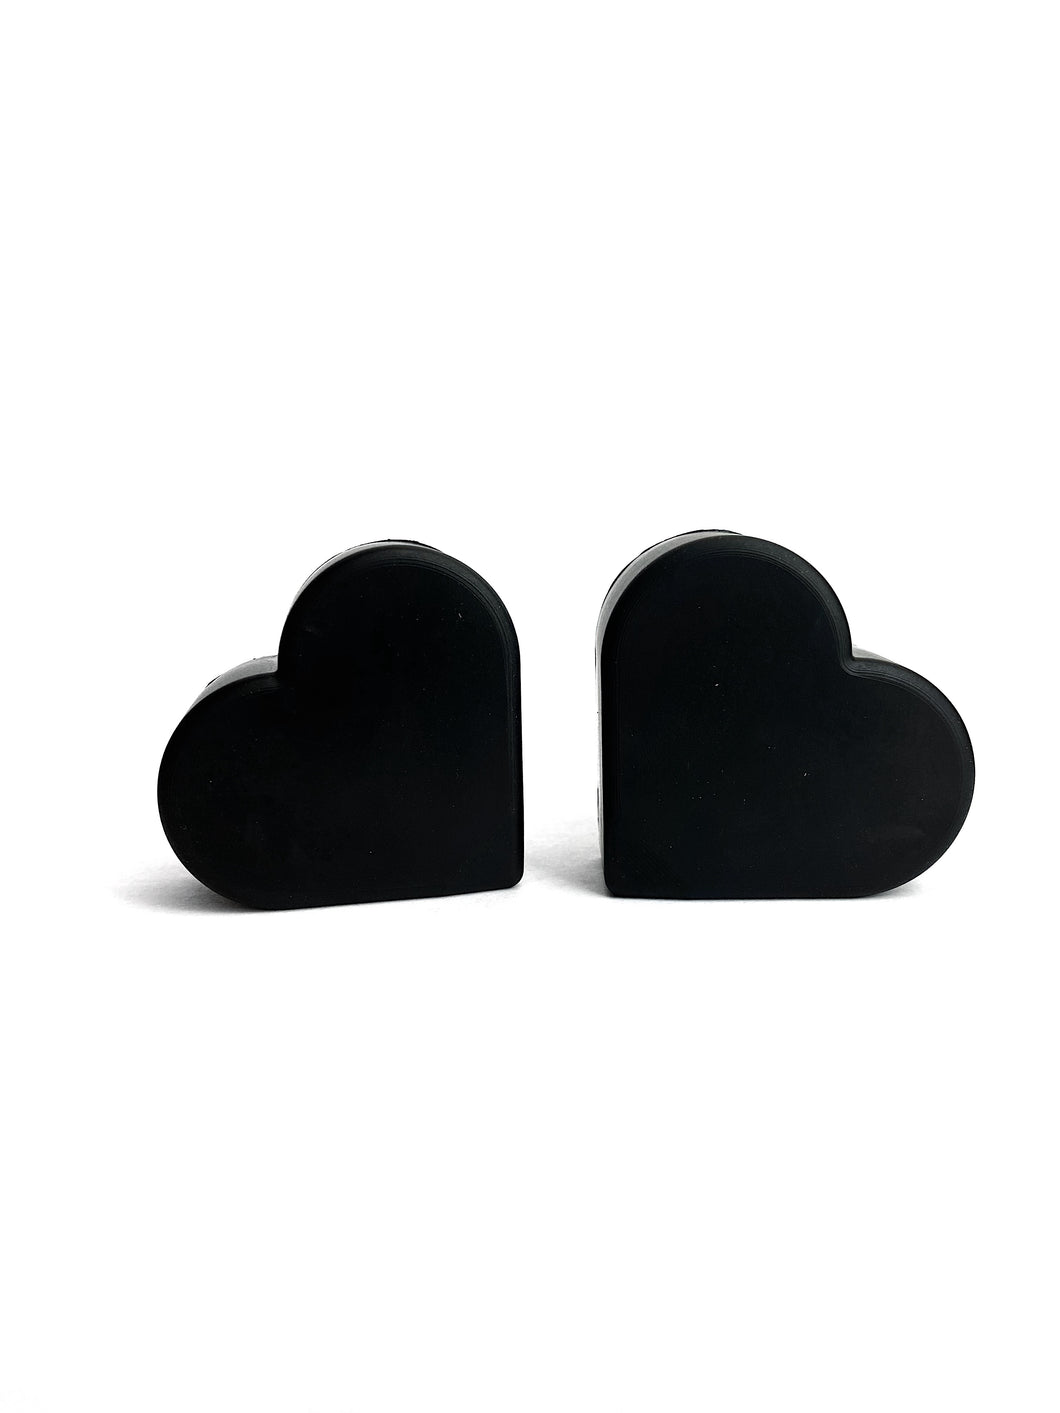 black color heart shaped roller skate toe stop on a white background